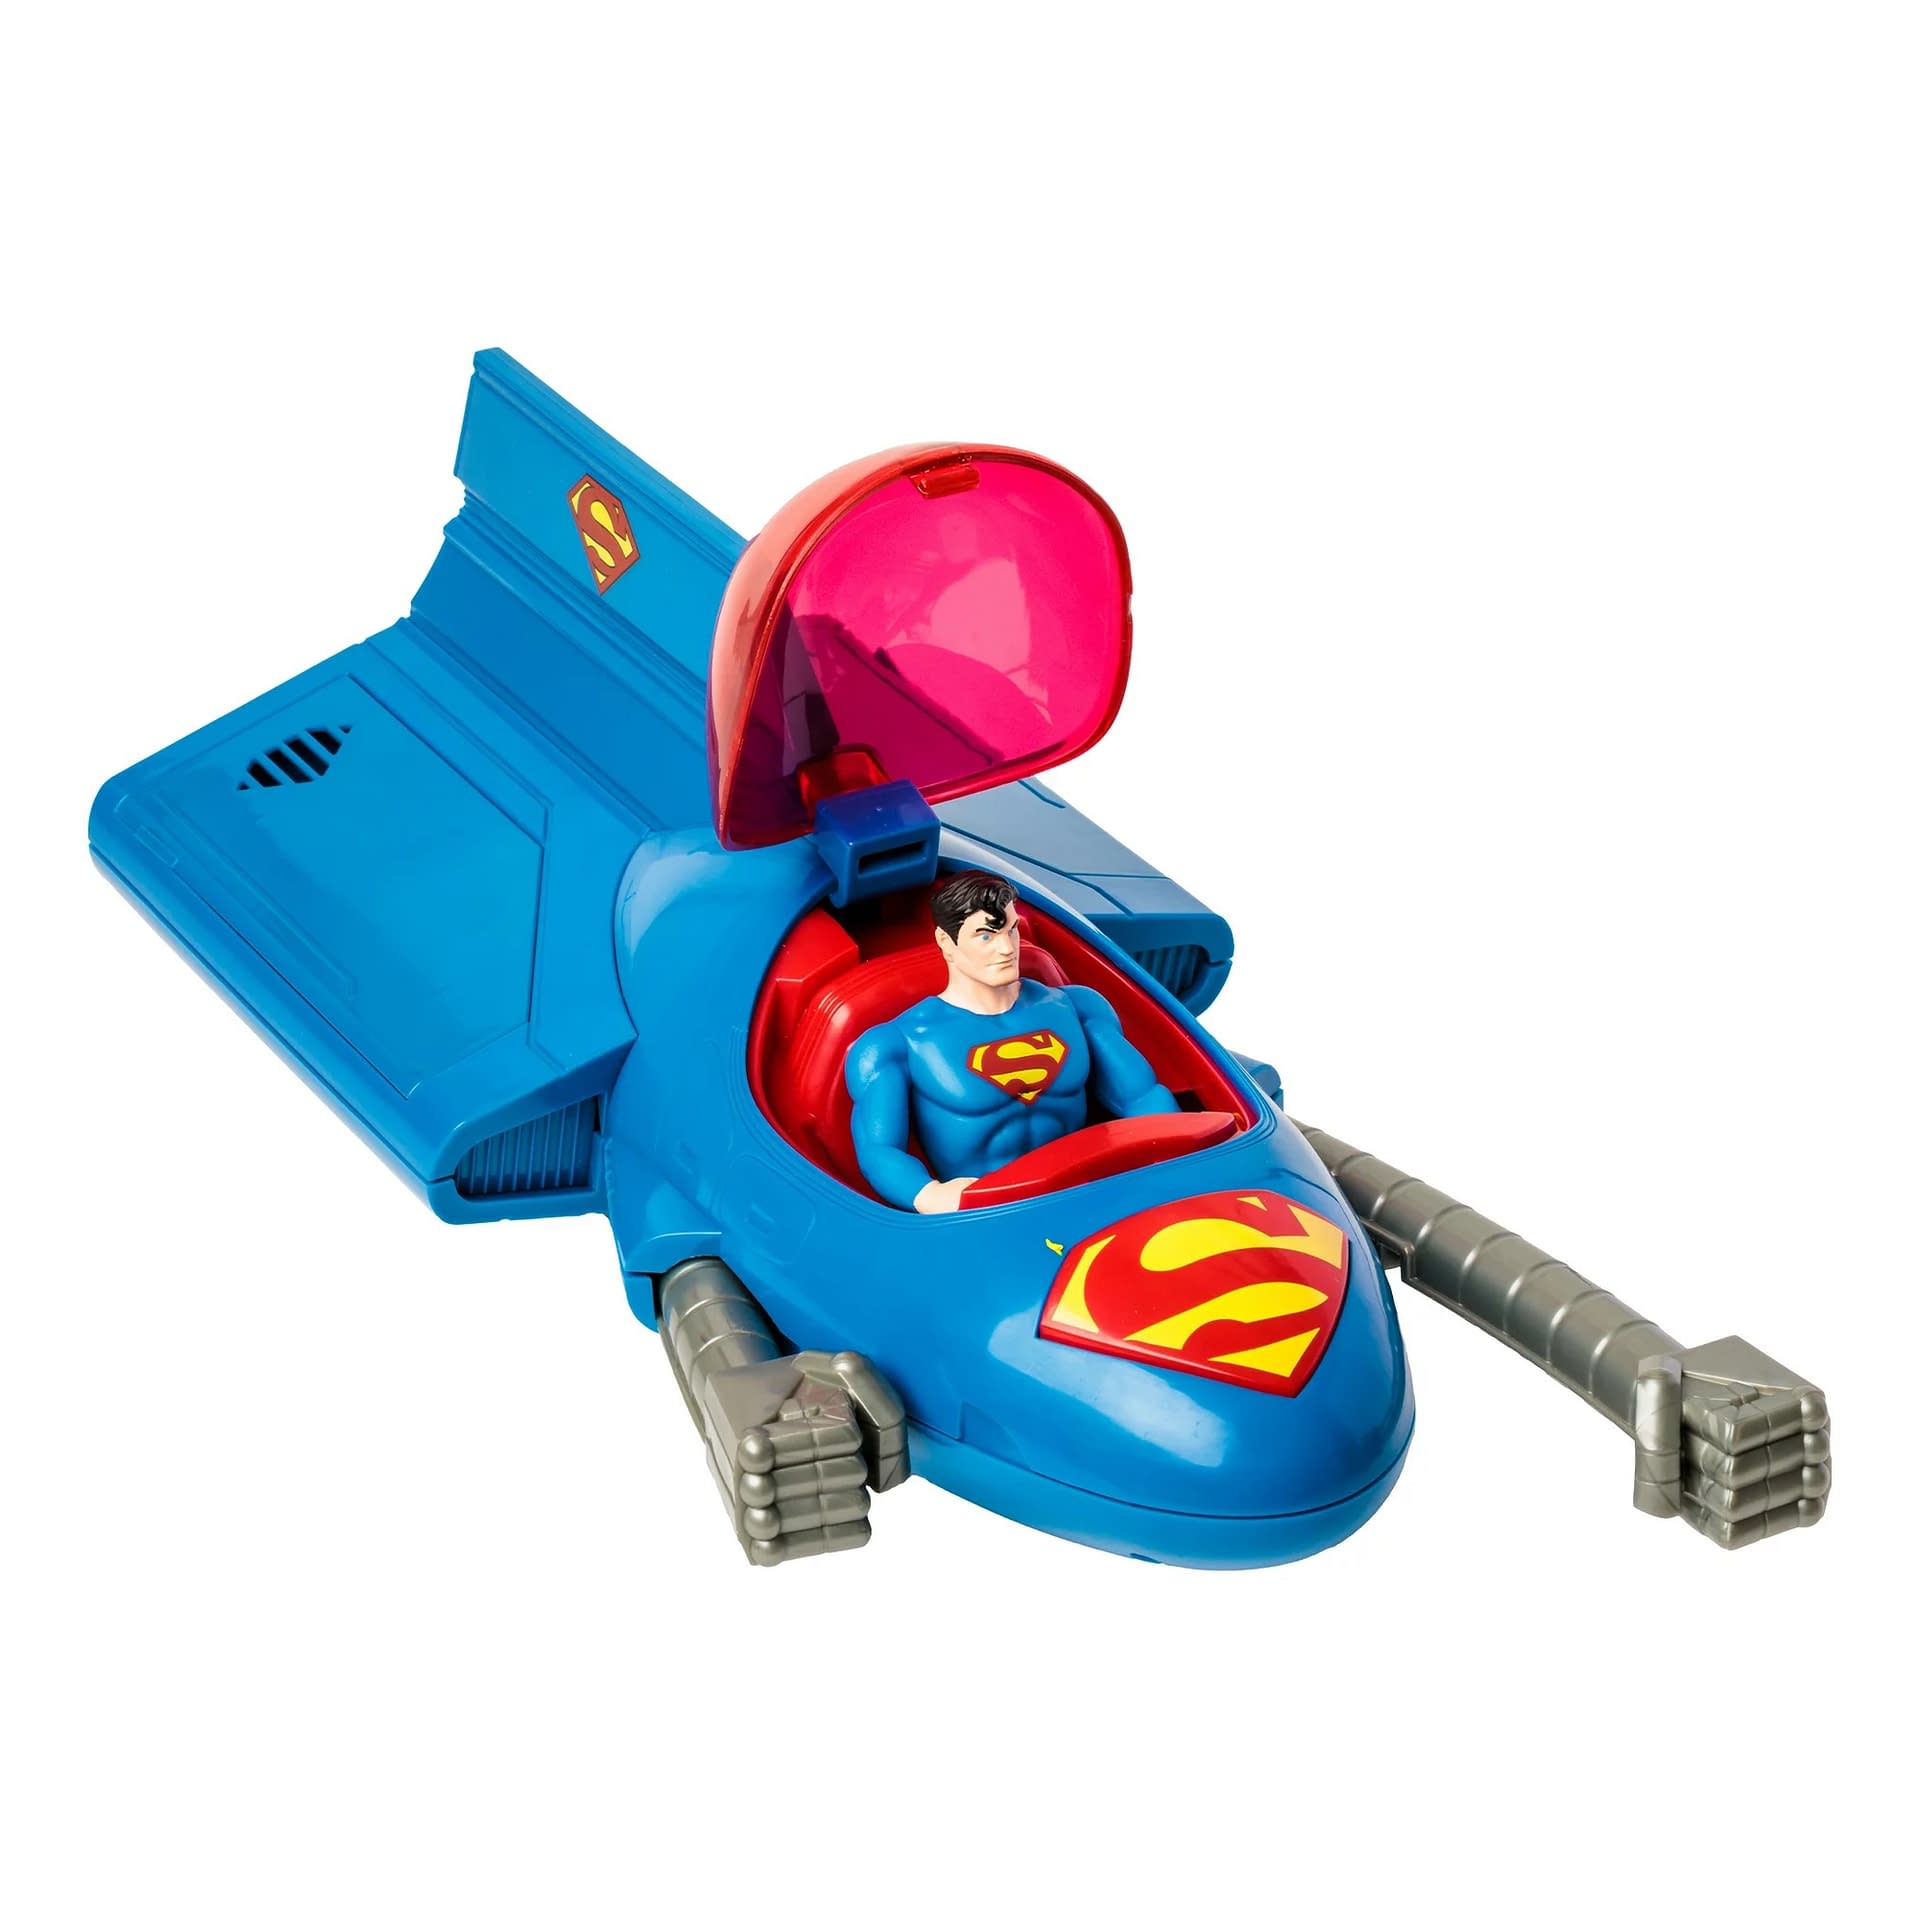 DC Comics Super Powers Vehicles Arriving from McFarlane Toys 